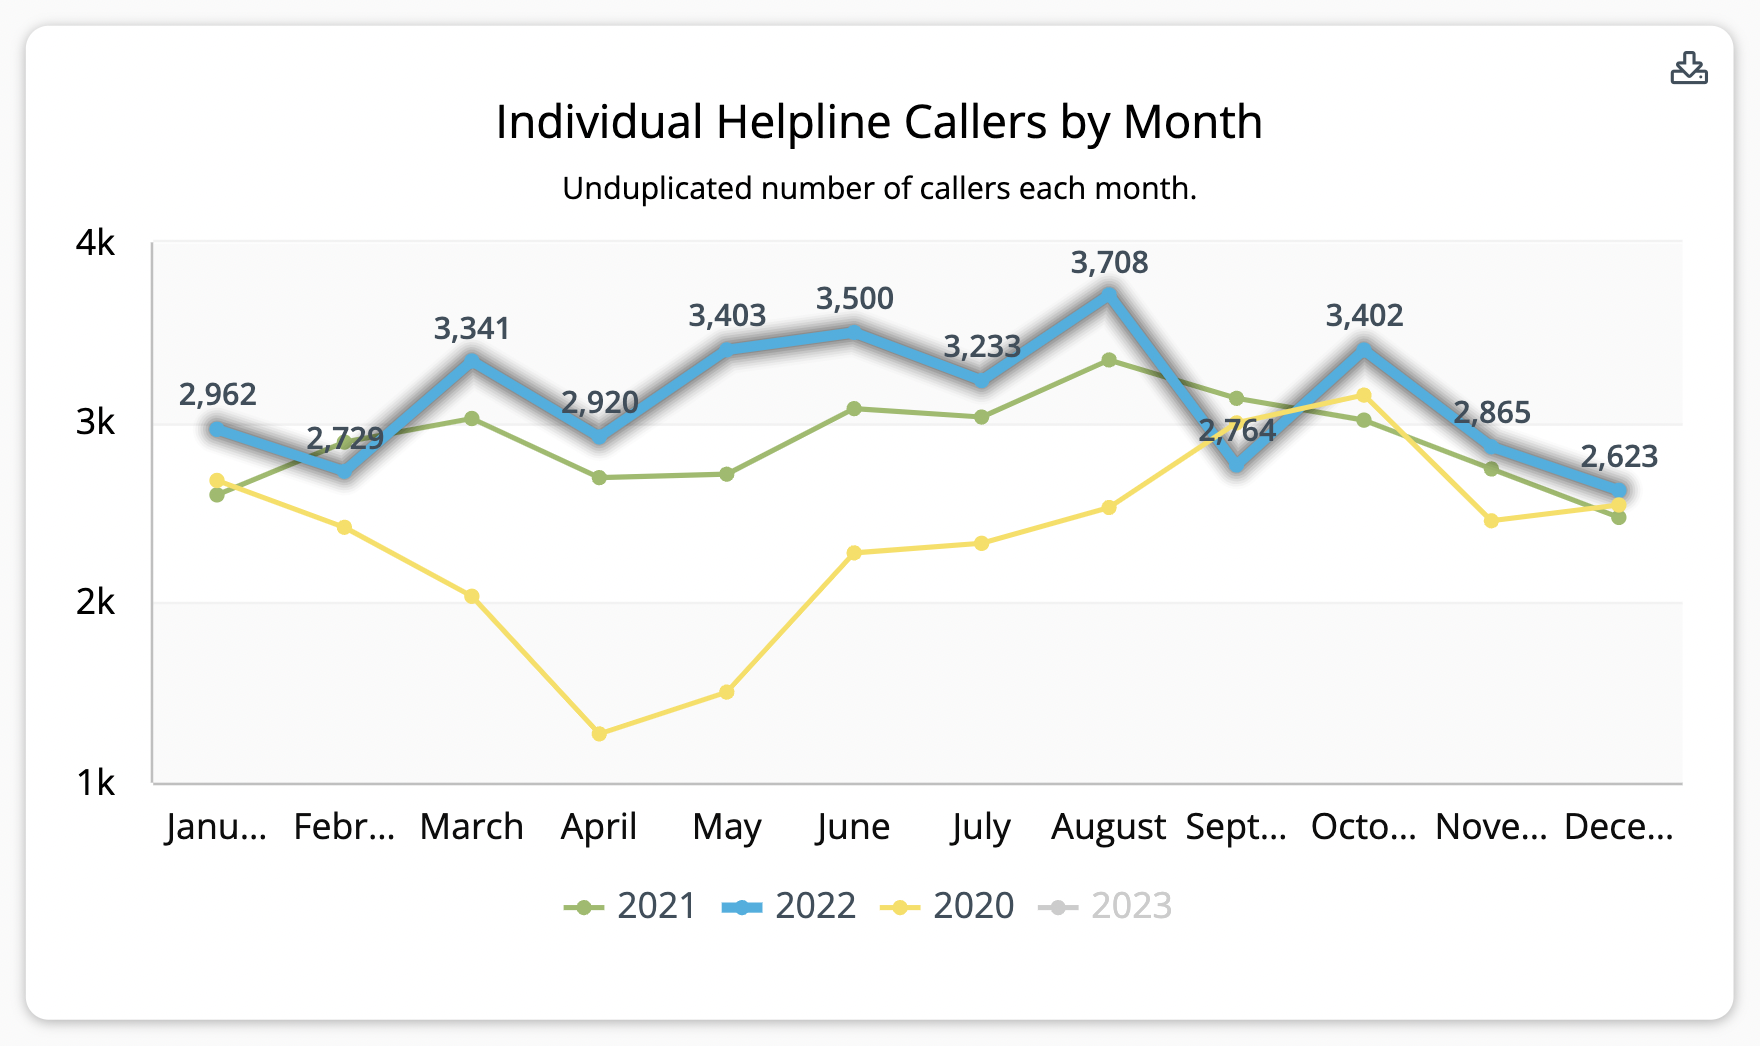 This chart shows the number of unique people who called each month for the past three years. 2022 was a year of record demand in callers.